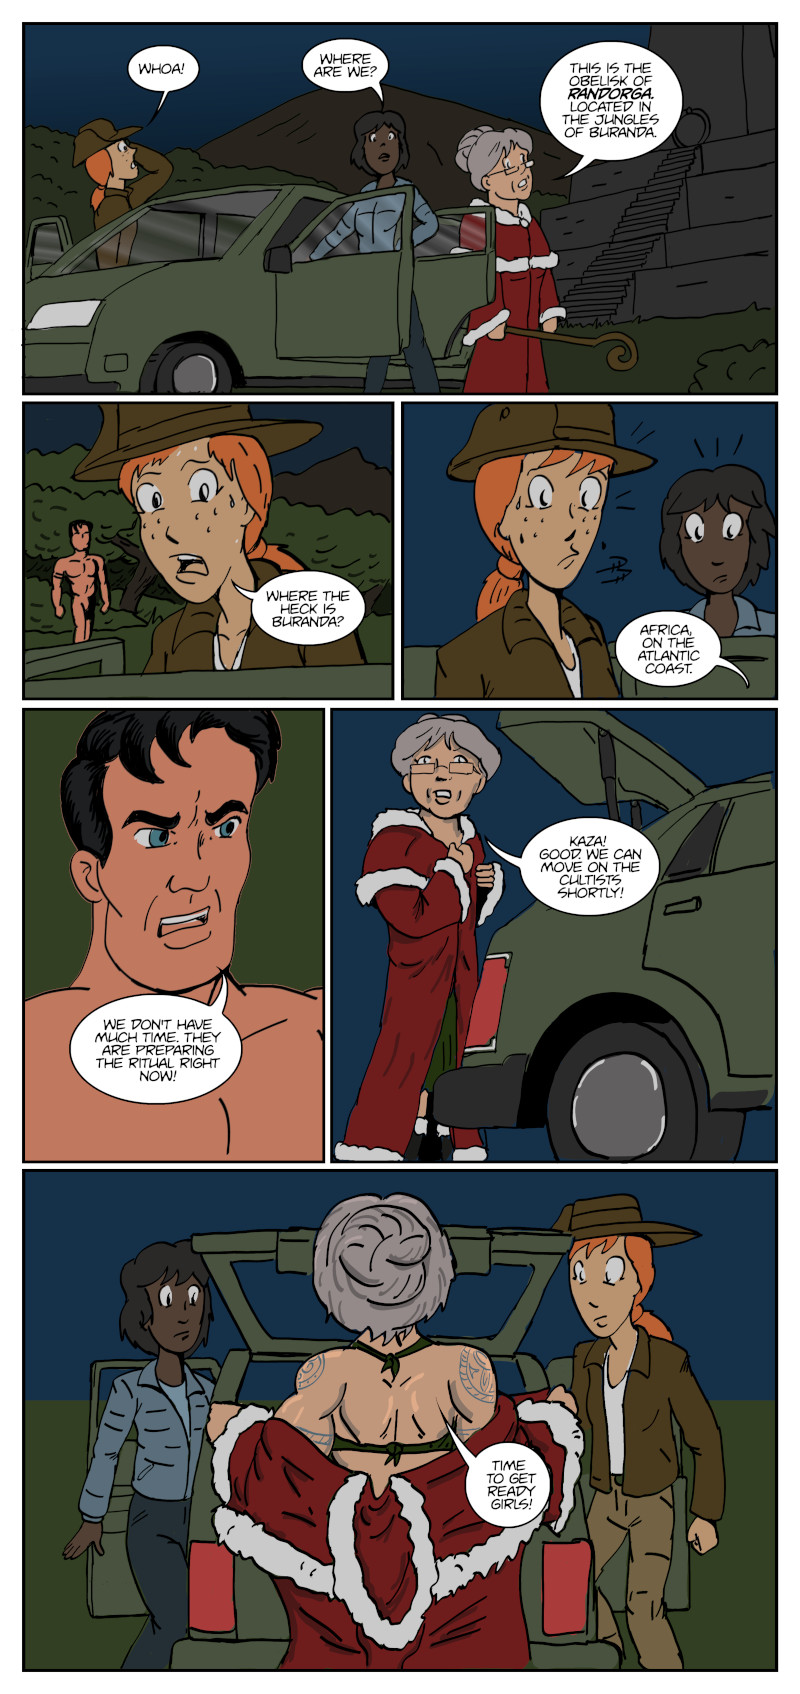 Pine Hill Creature Feature by Jay042 Page 3 of 7